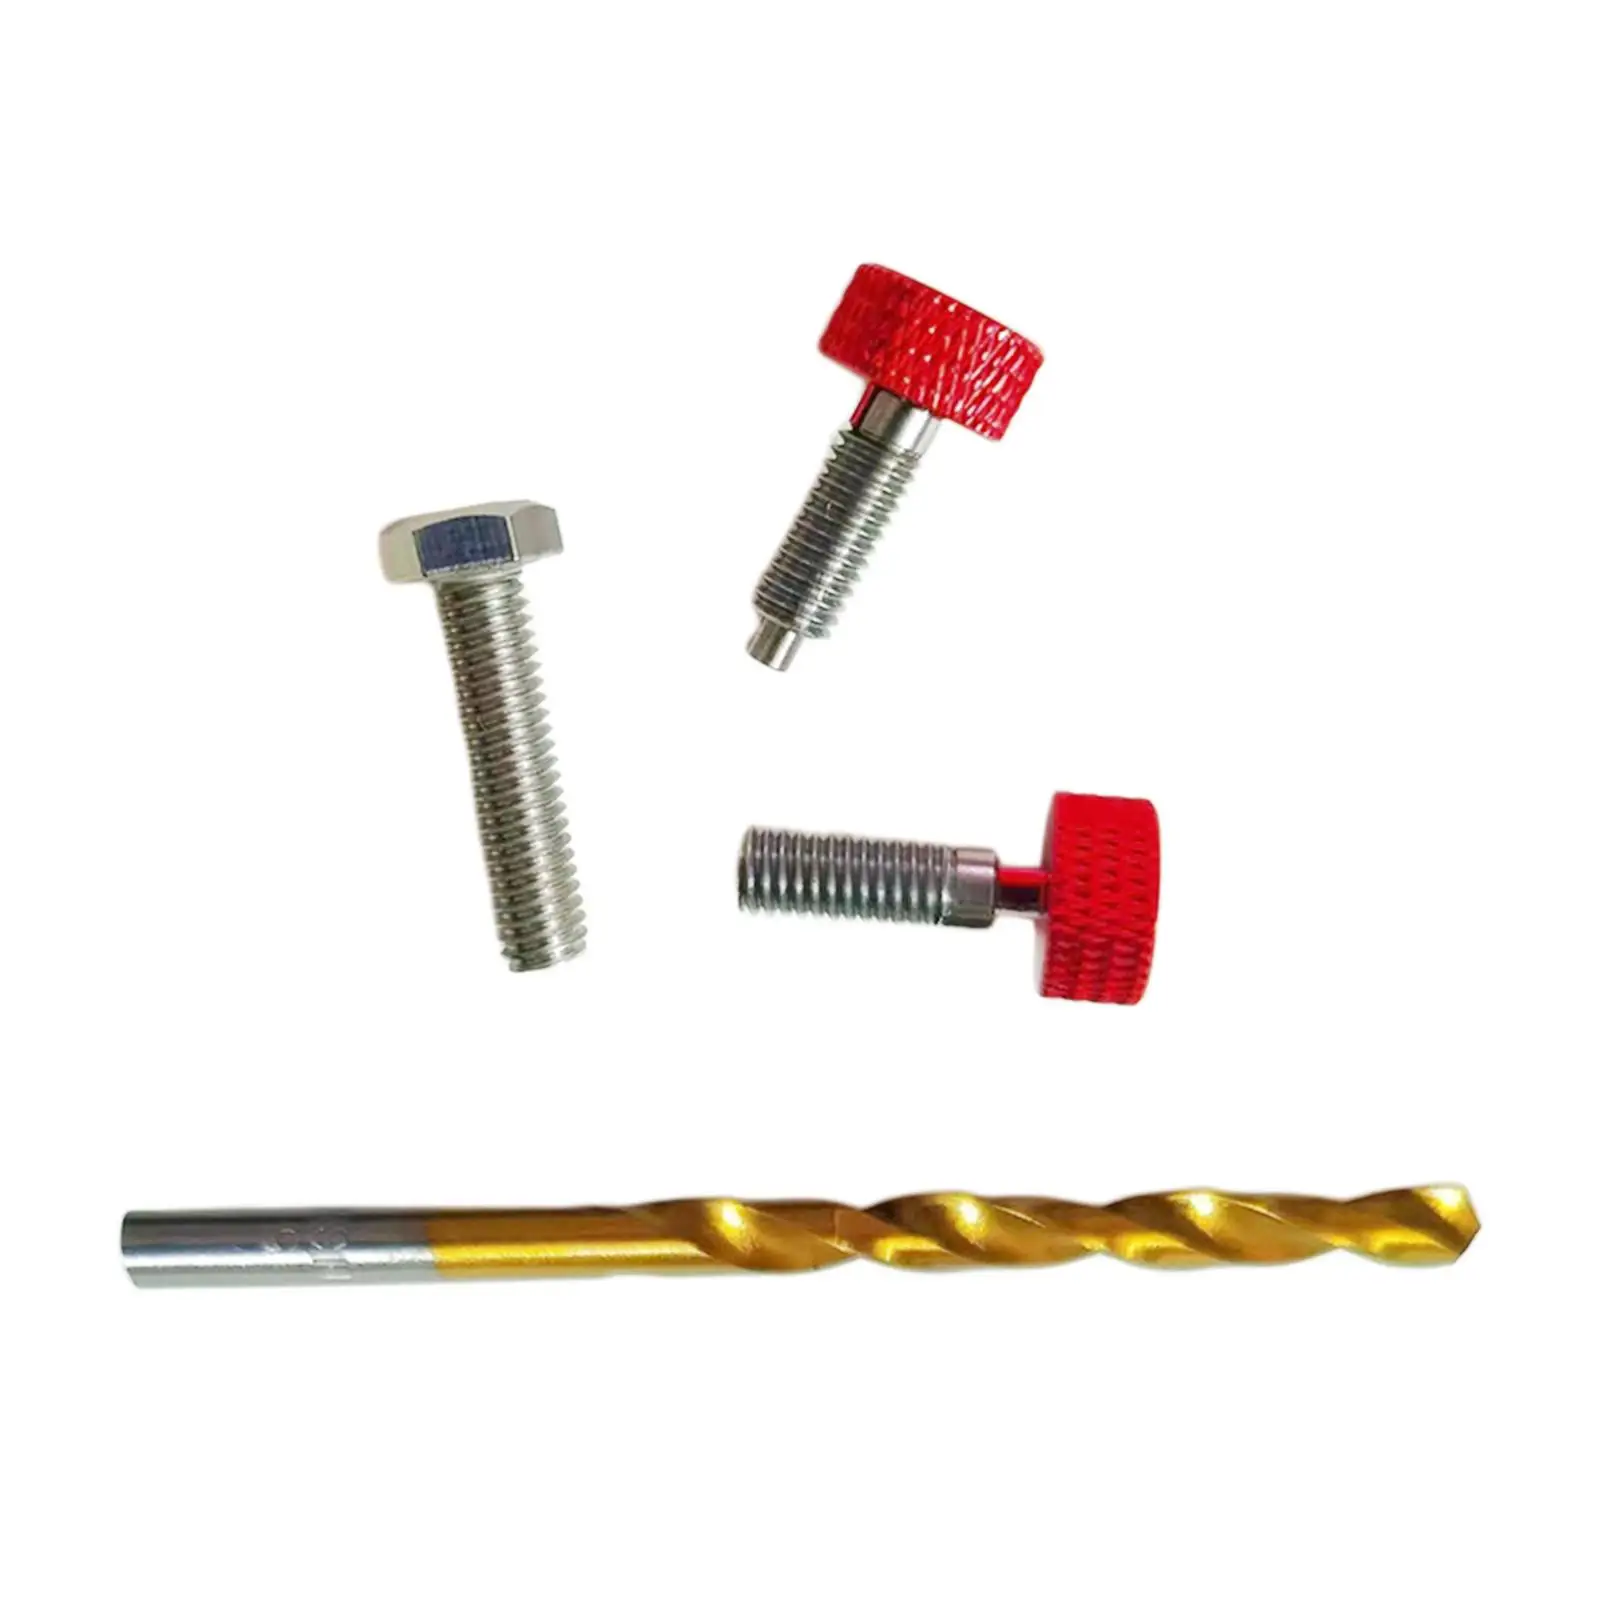 Handle Quick Release Pins, Lock Out Handle Retractable Stainless Plunger with Knurled Handle